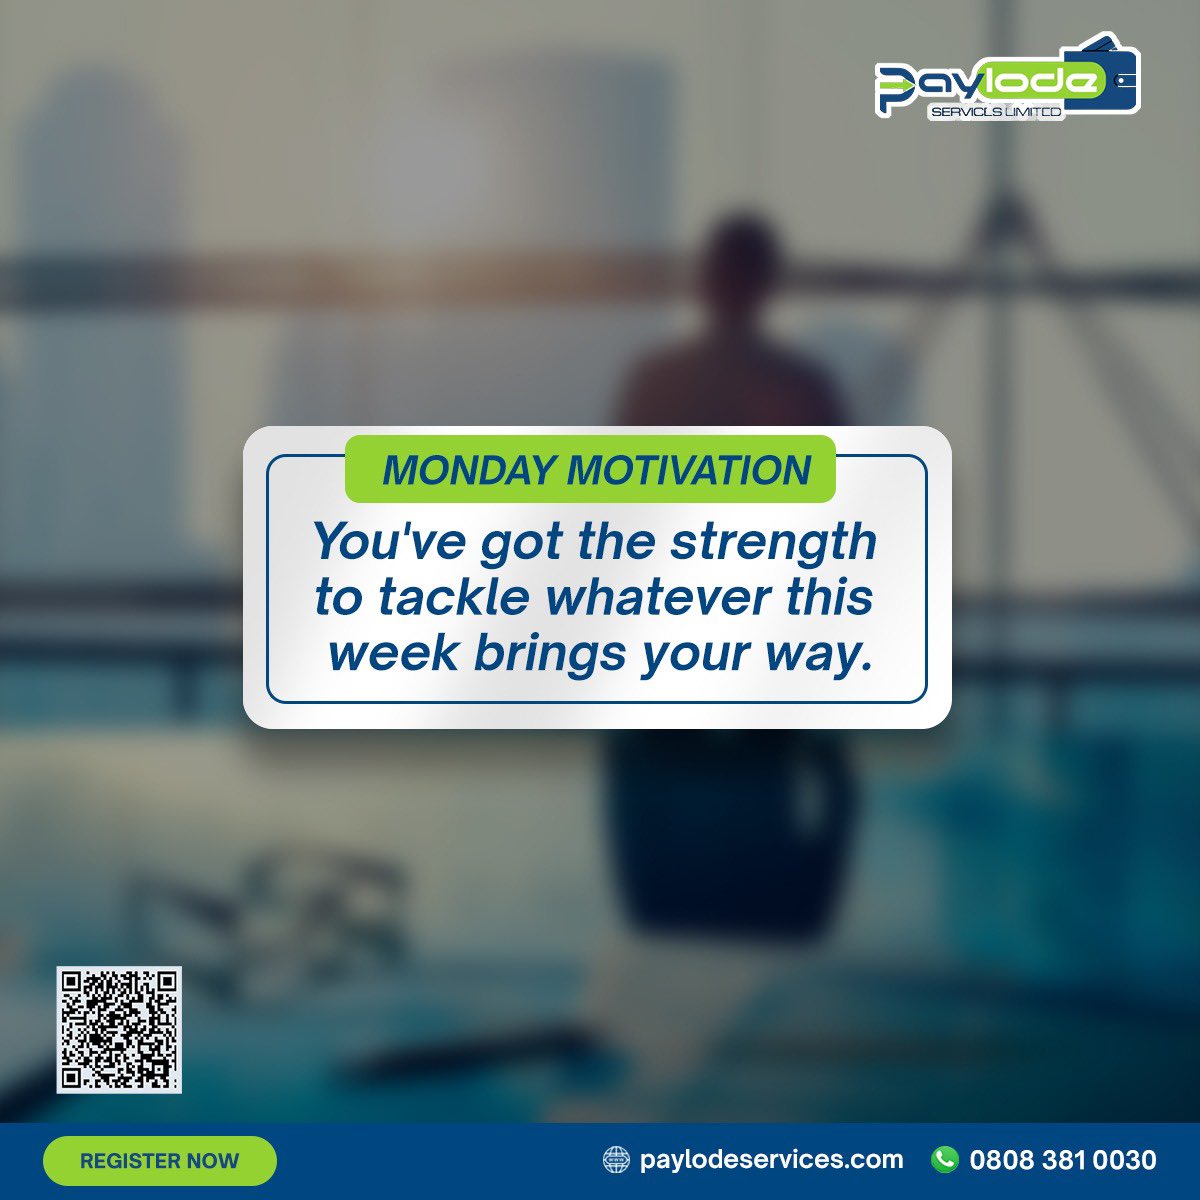 It’s Monday again. Another chance to tackle whatever this week brings your way. 

Have a great week.
#mondsymotivation #workdaymonday #paylodeserviceslimited #paywithoaylode